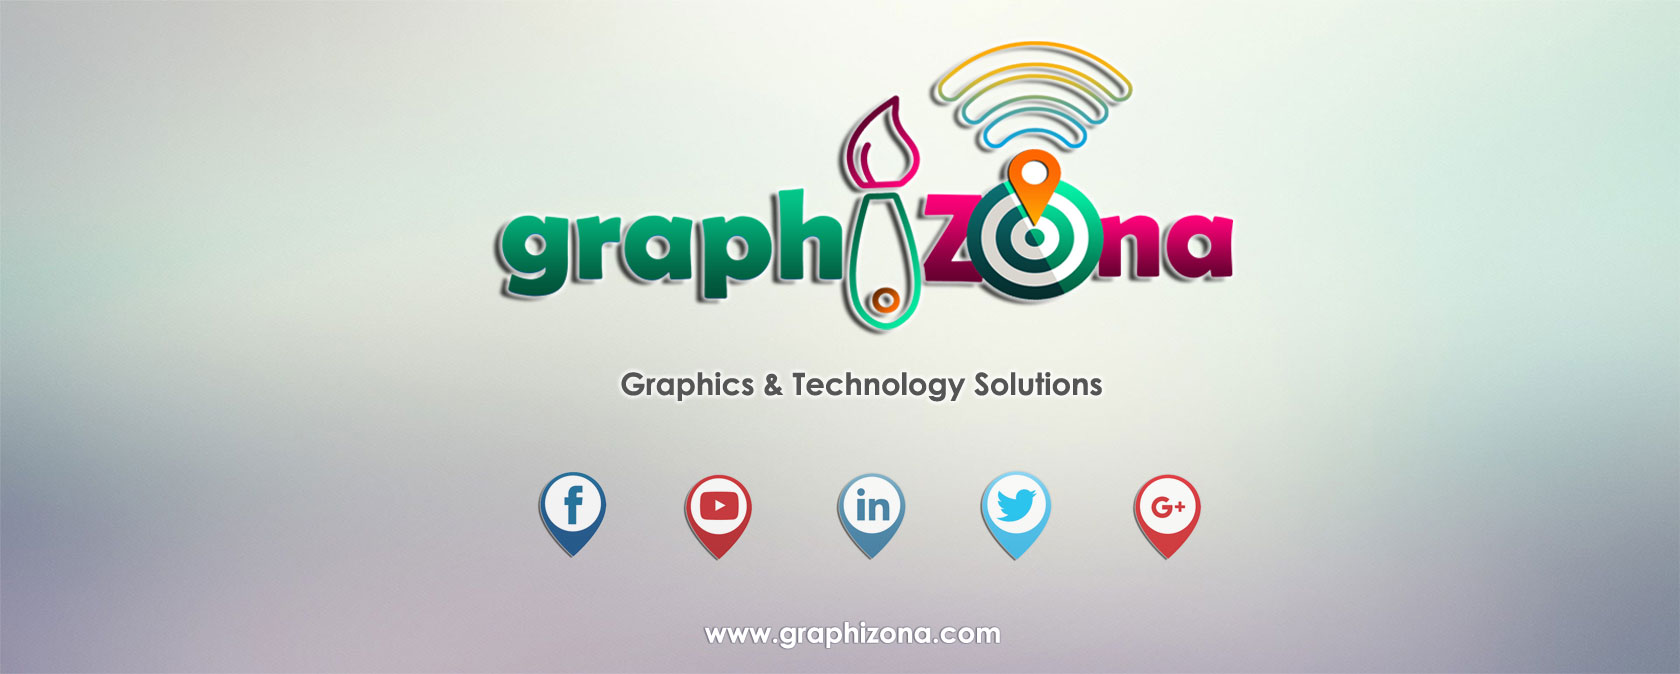 graphics and technology solutions india graphizona